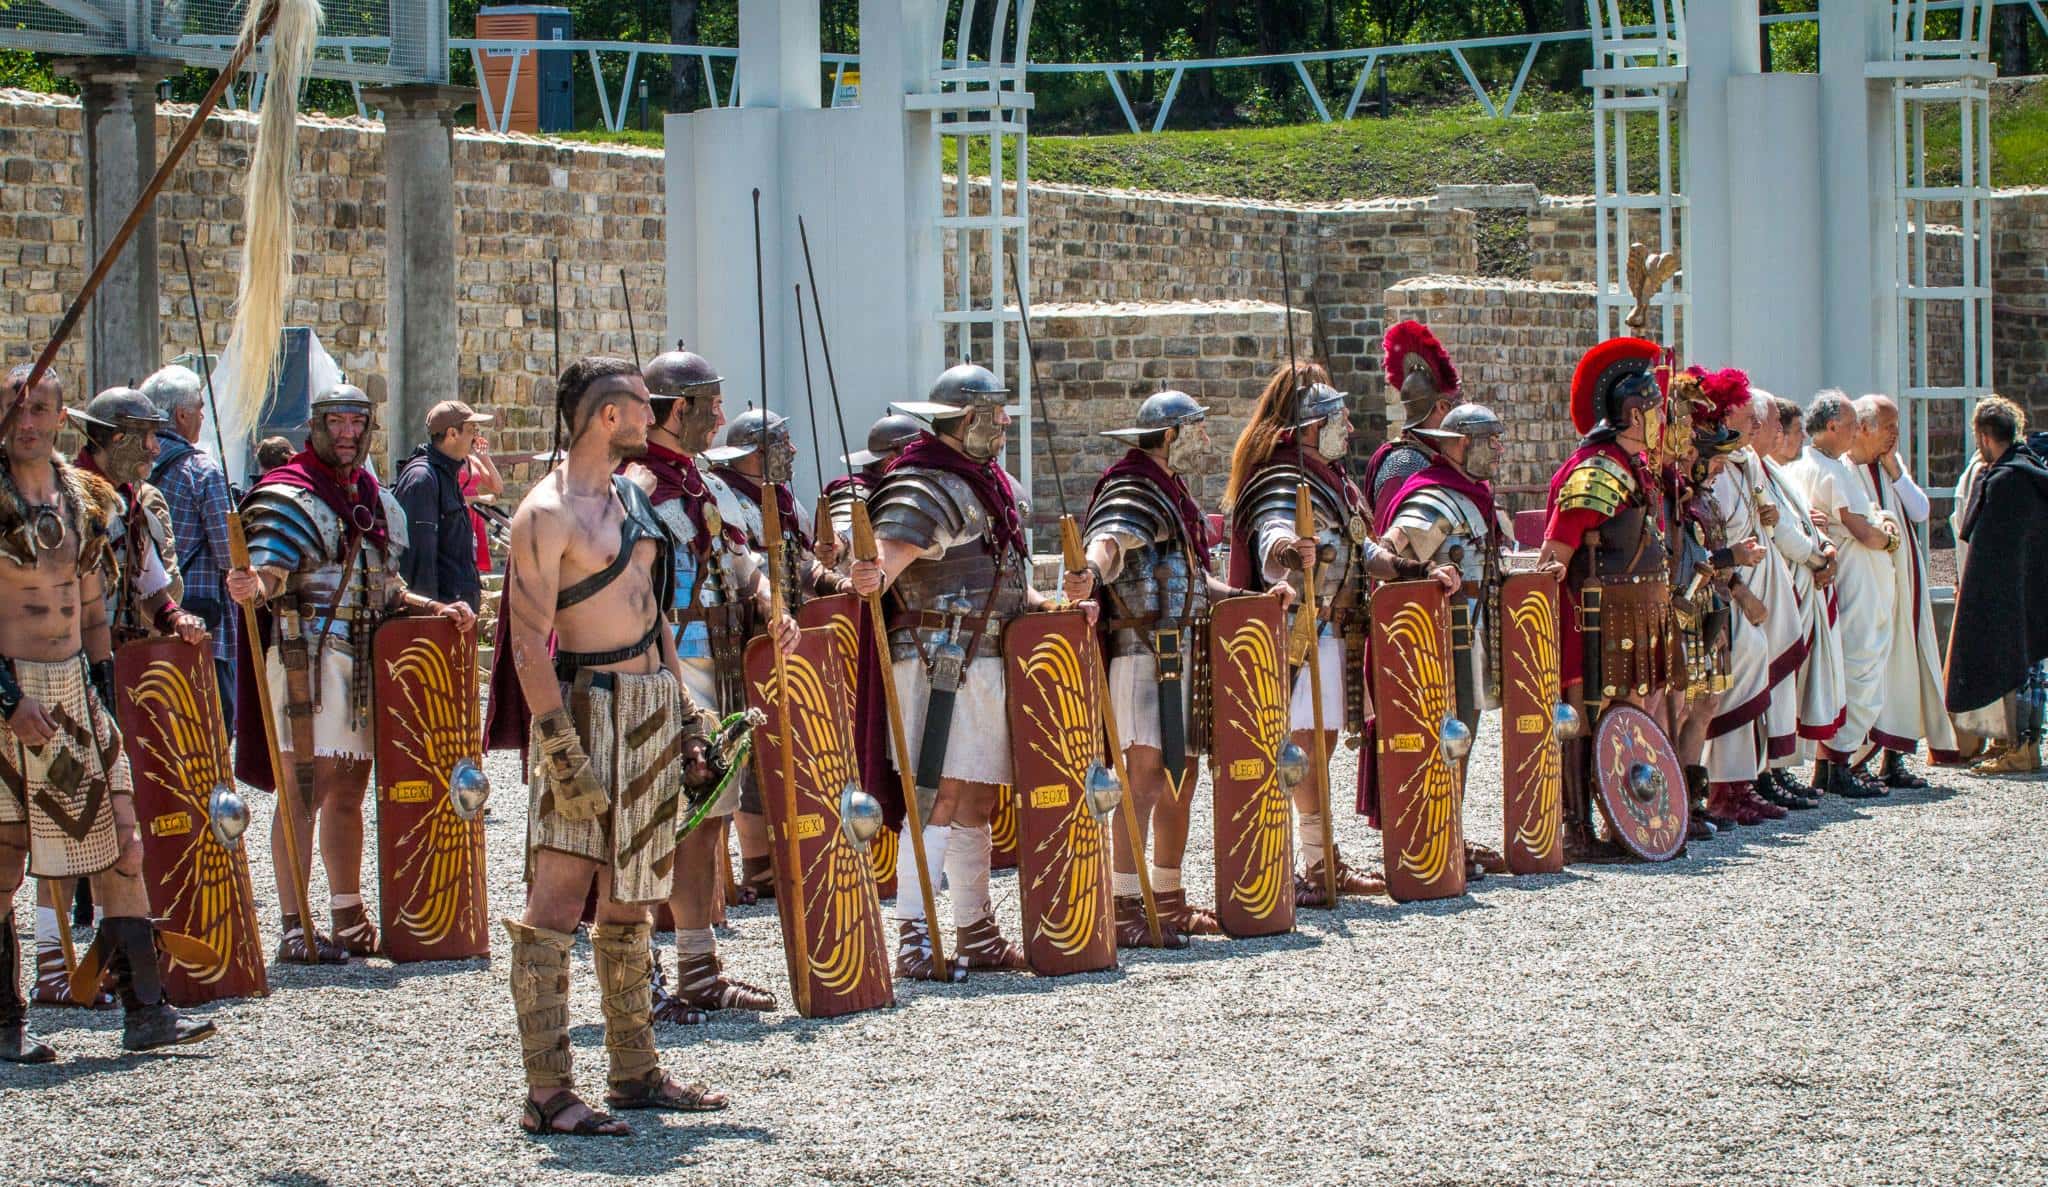 43 Interesting Facts About Roman Gladiators